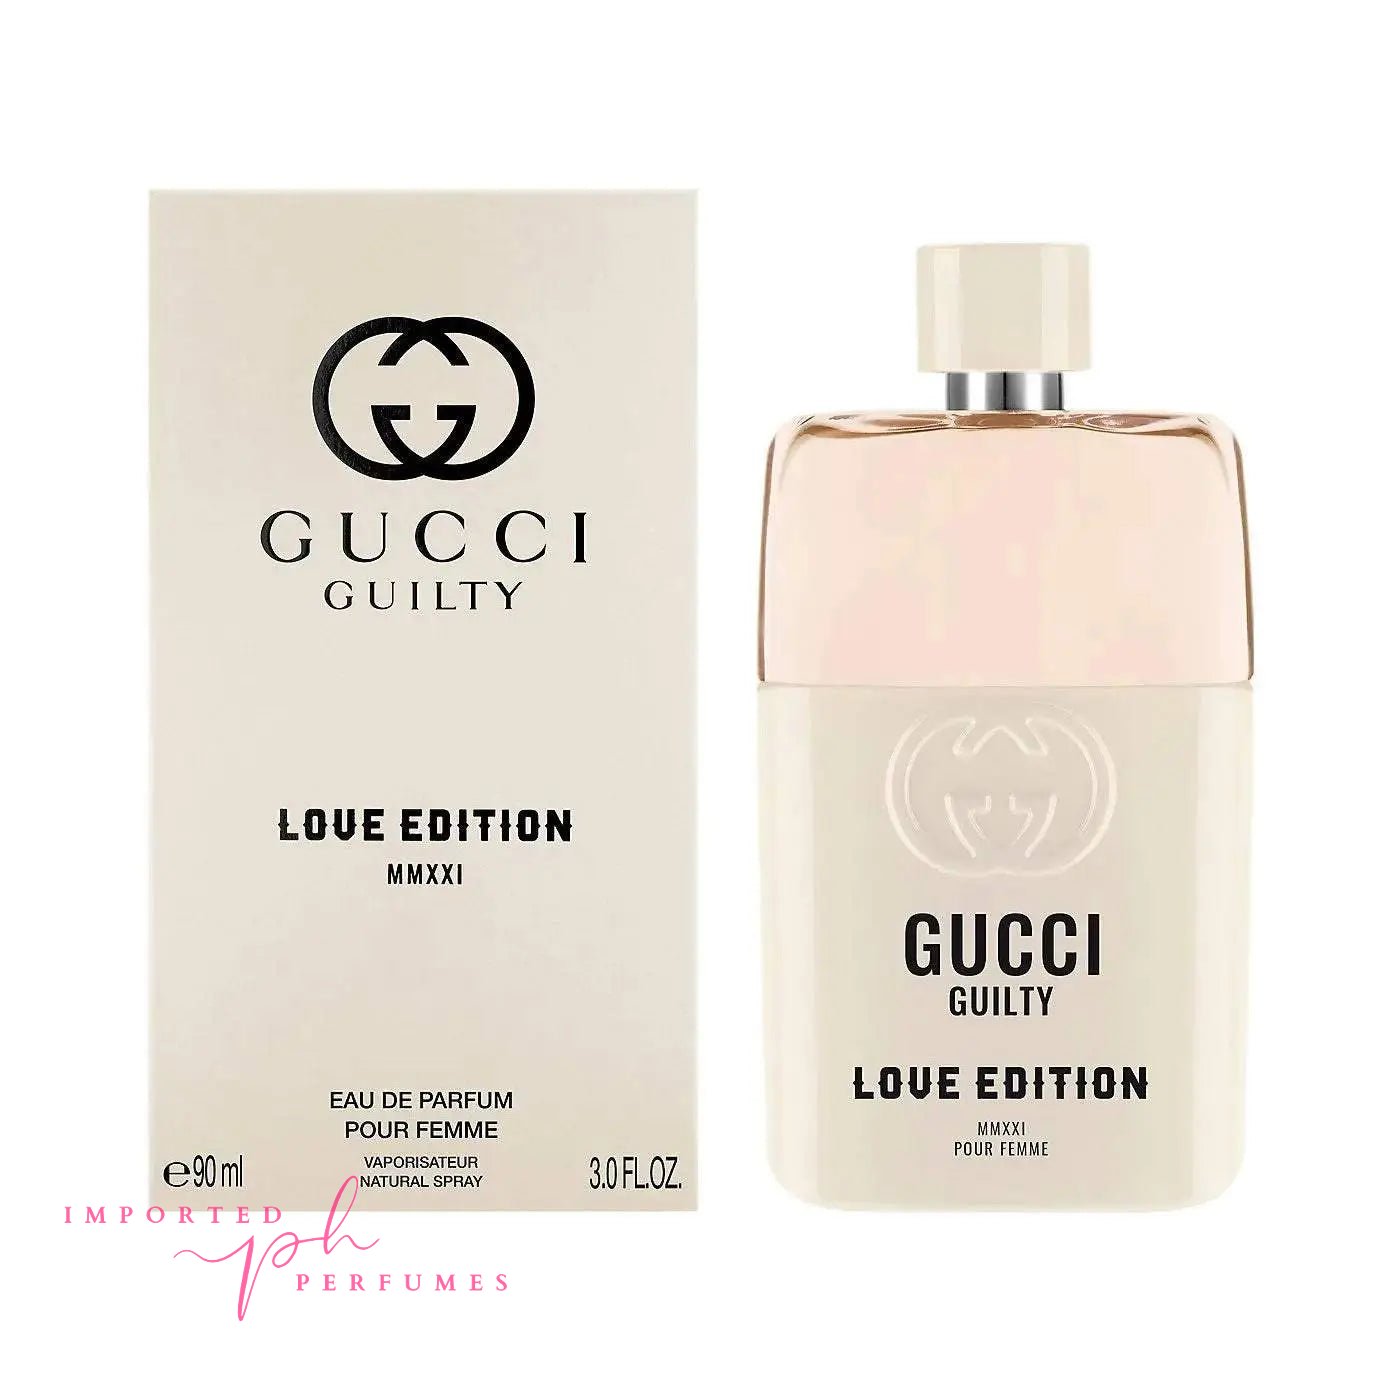 [TESTER] Gucci Guilty Love Edition MMXXI pour Femme EDP 90ml Imported Perfumes Co